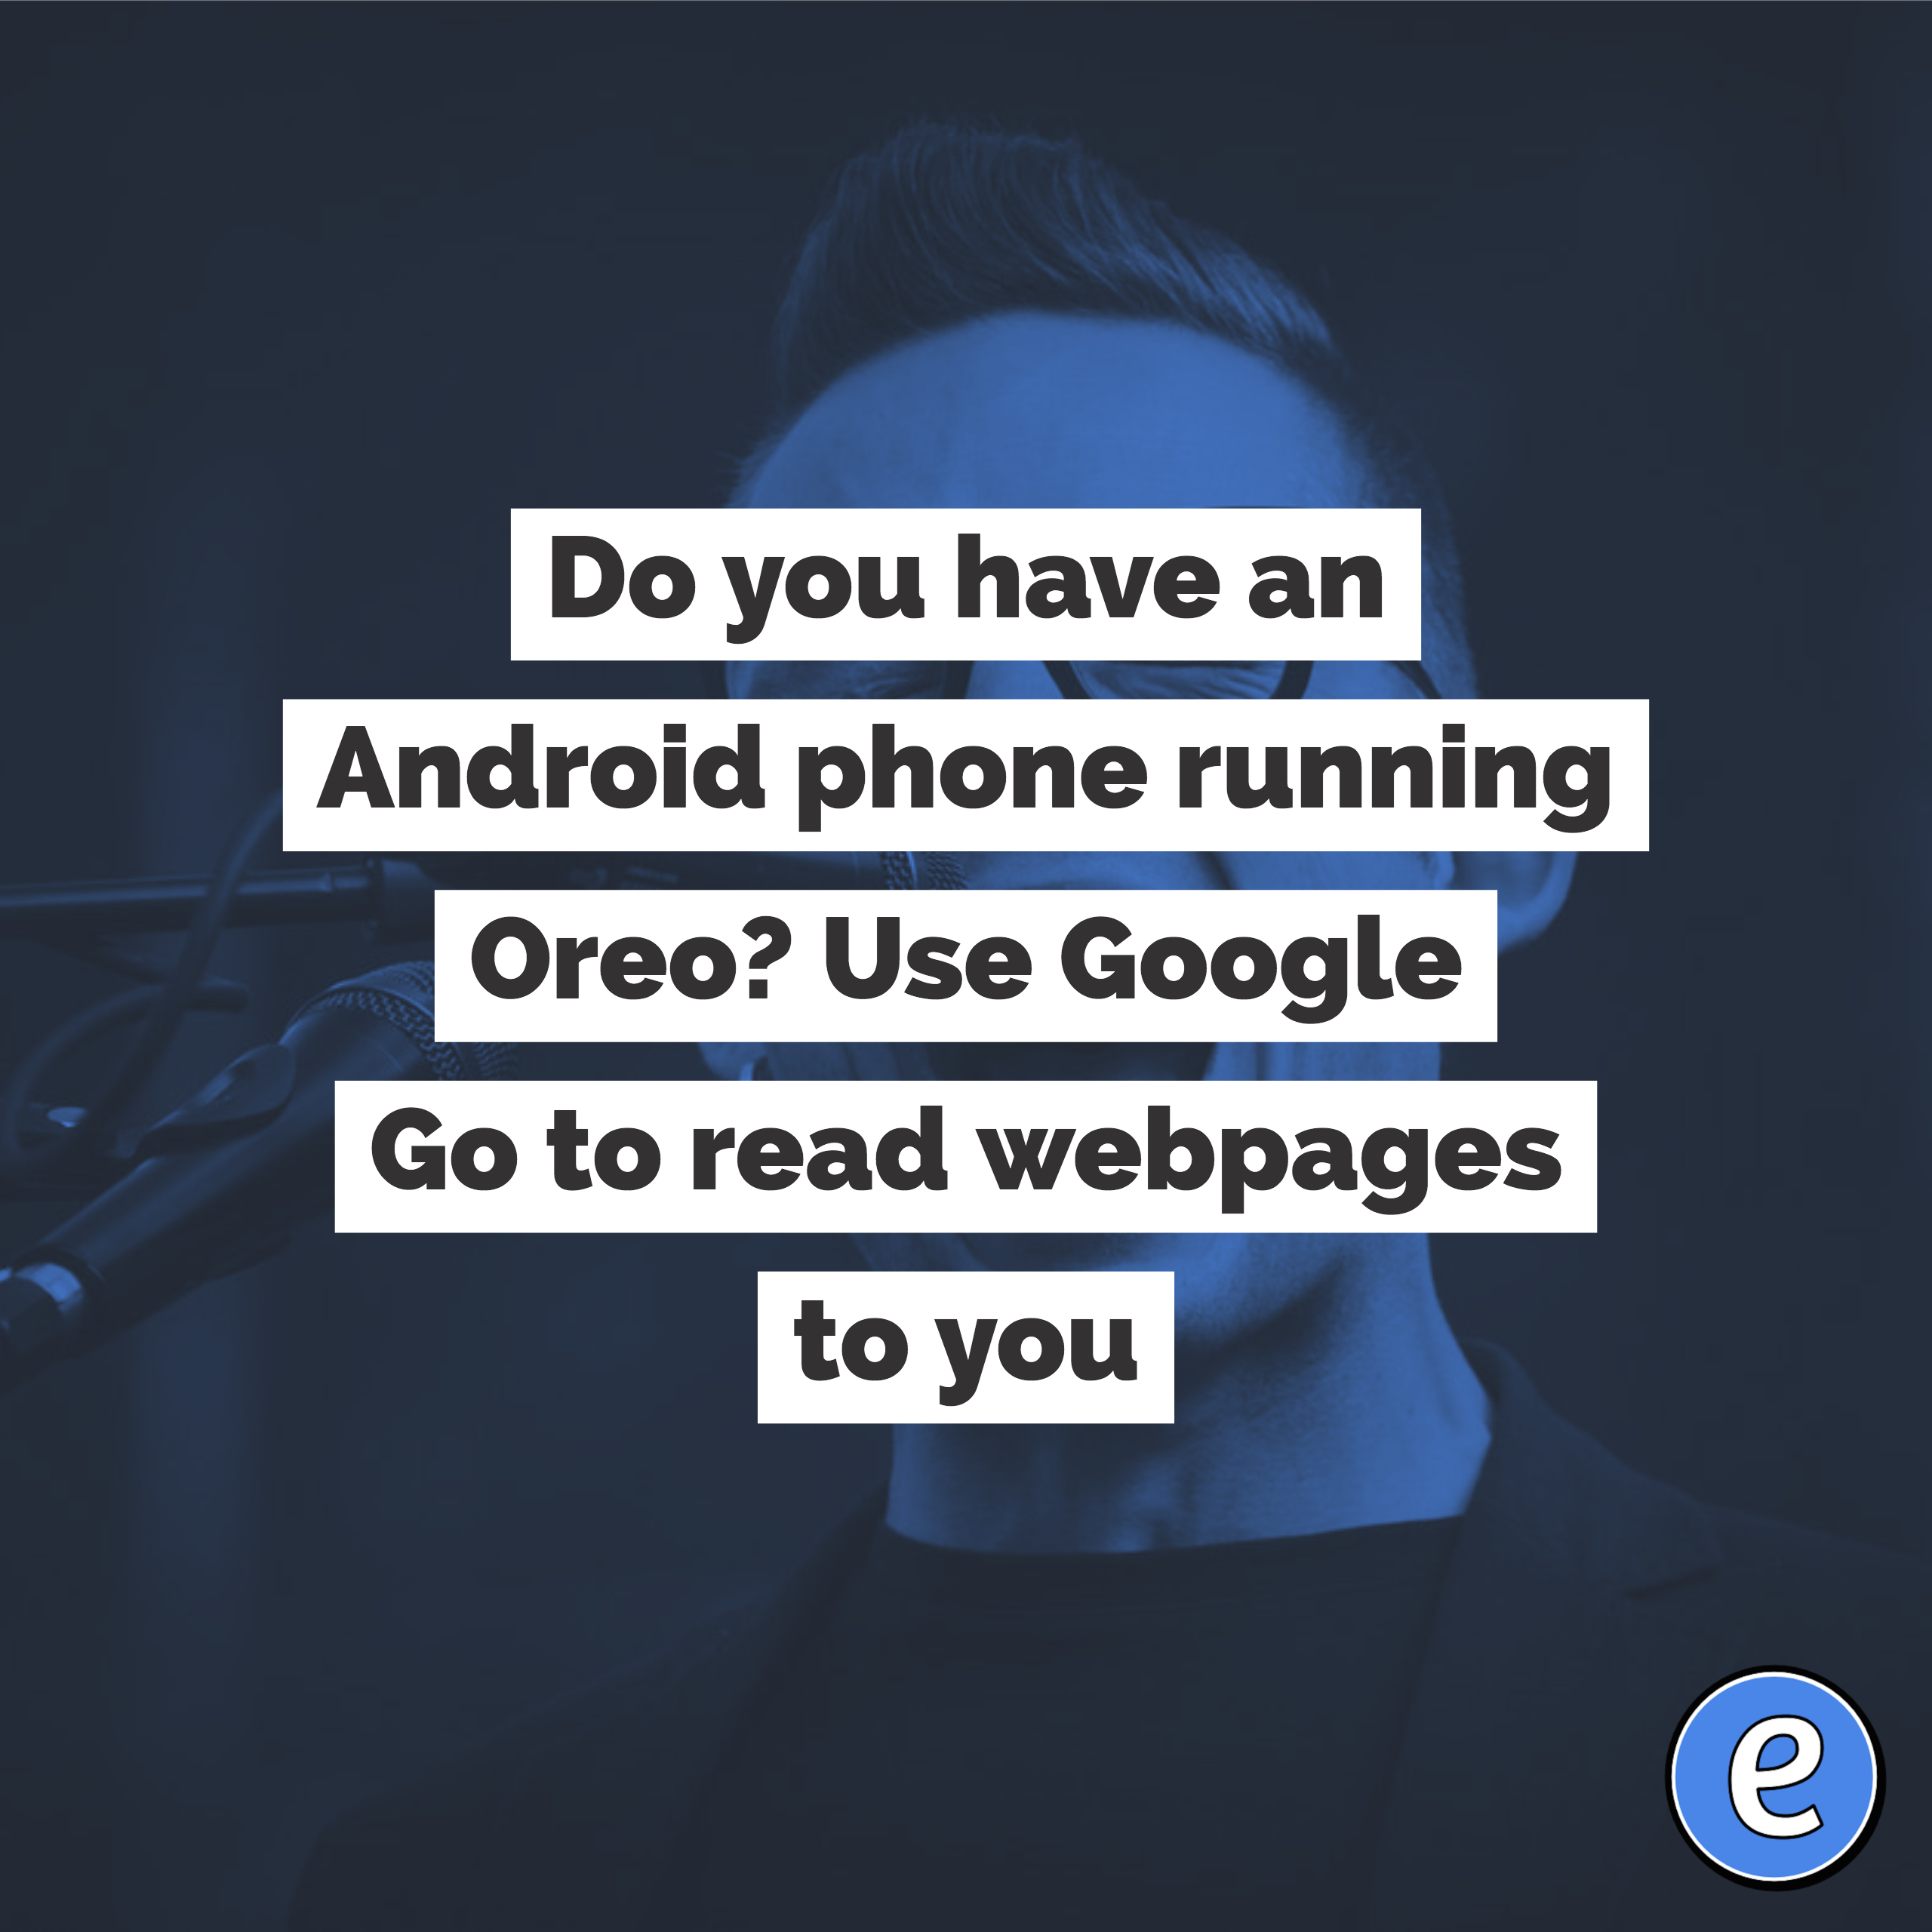 Do you have an Android phone running Oreo? Use Google Go to read webpages to you